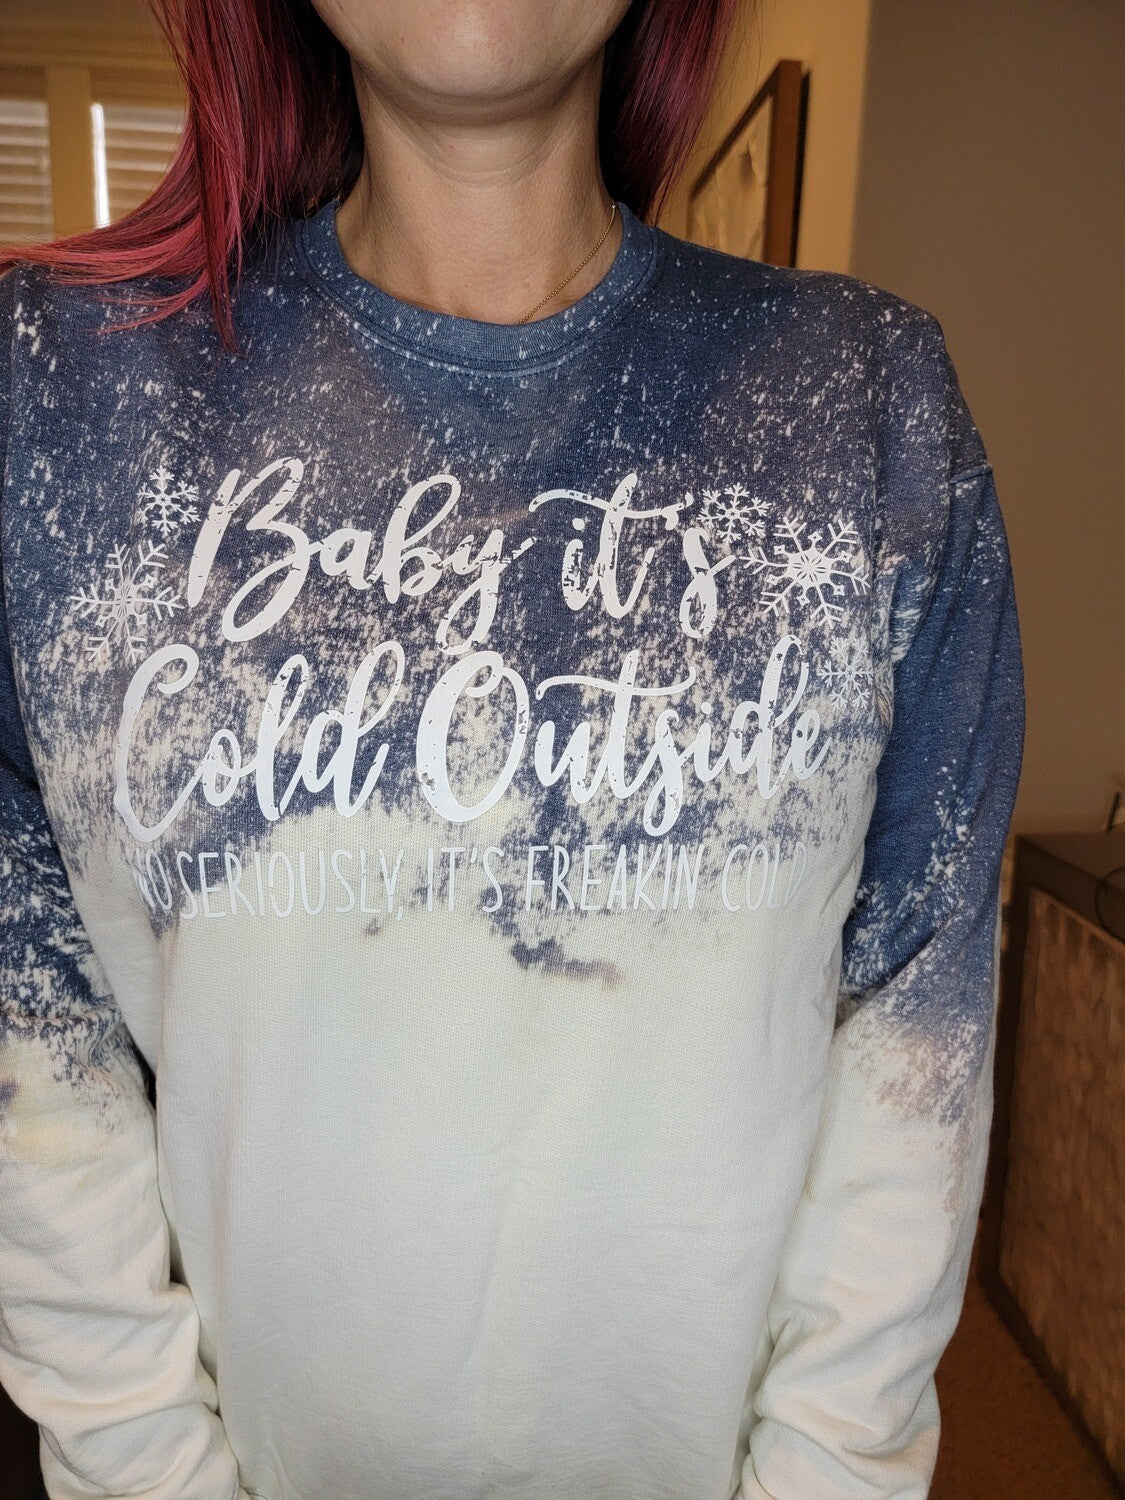 Baby It's Cold Outside Sweater